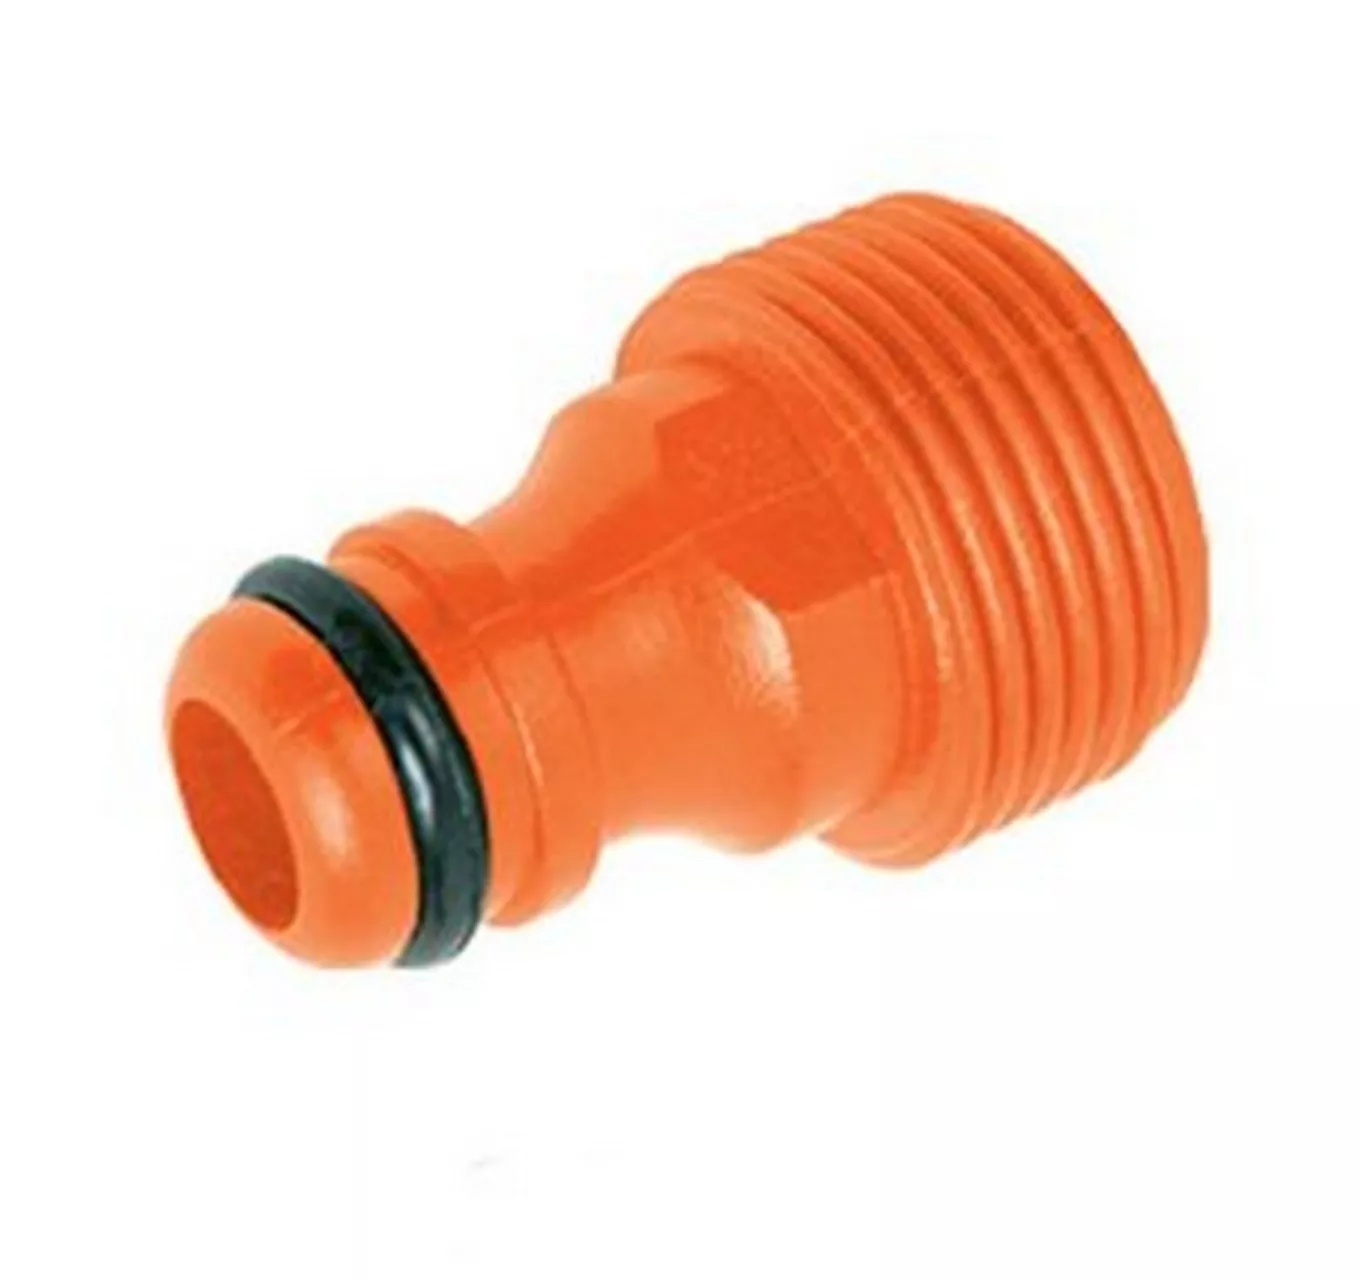 Hose Connector Male 3/4"